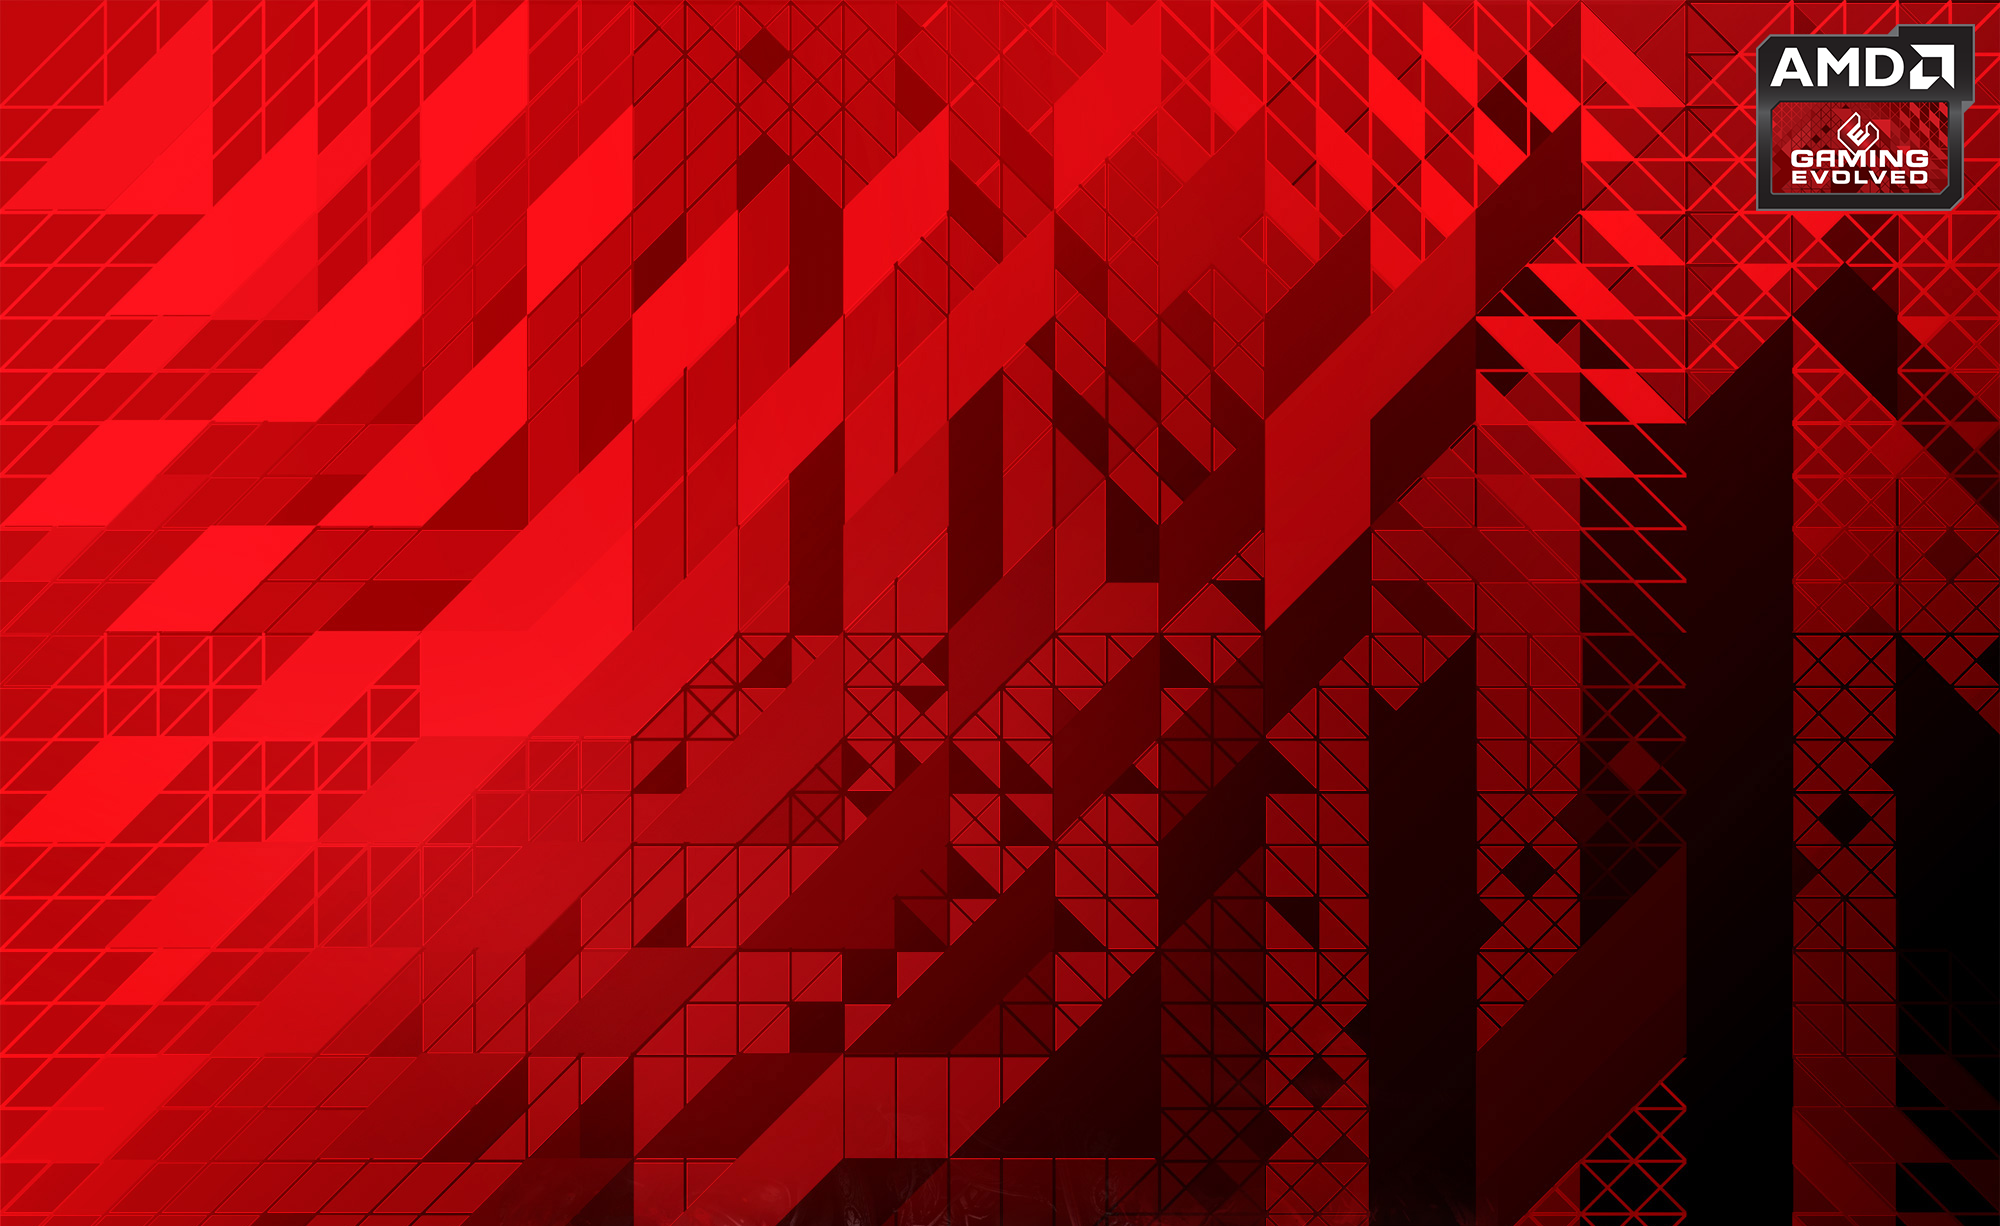 Made A Huge Collection Of Amd Wallpaper This Morning There S One